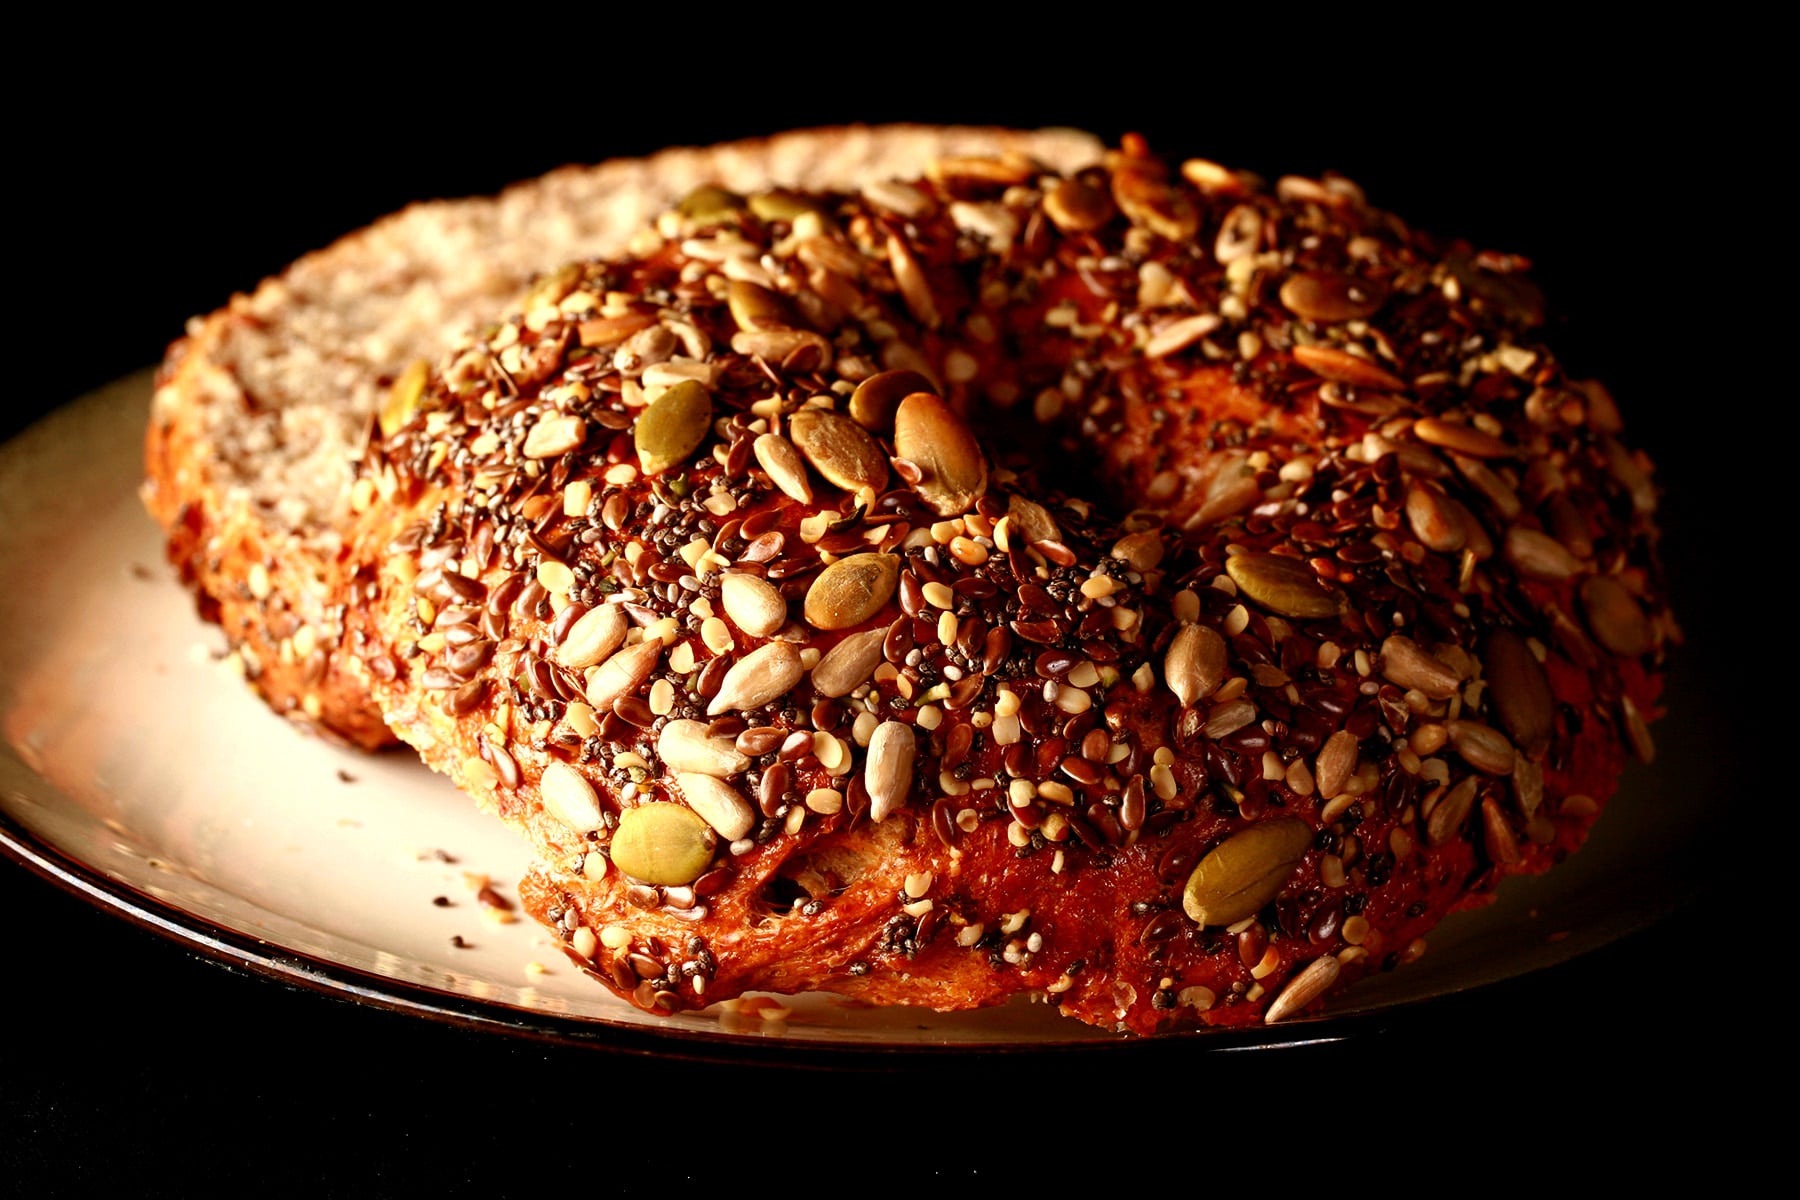 A whole wheat and flax bagel, sliced and served on a small plate. The top side of the bagel is covered in a mix of seeds - pumpkin, sunflower, sesame, chia, and poppy.